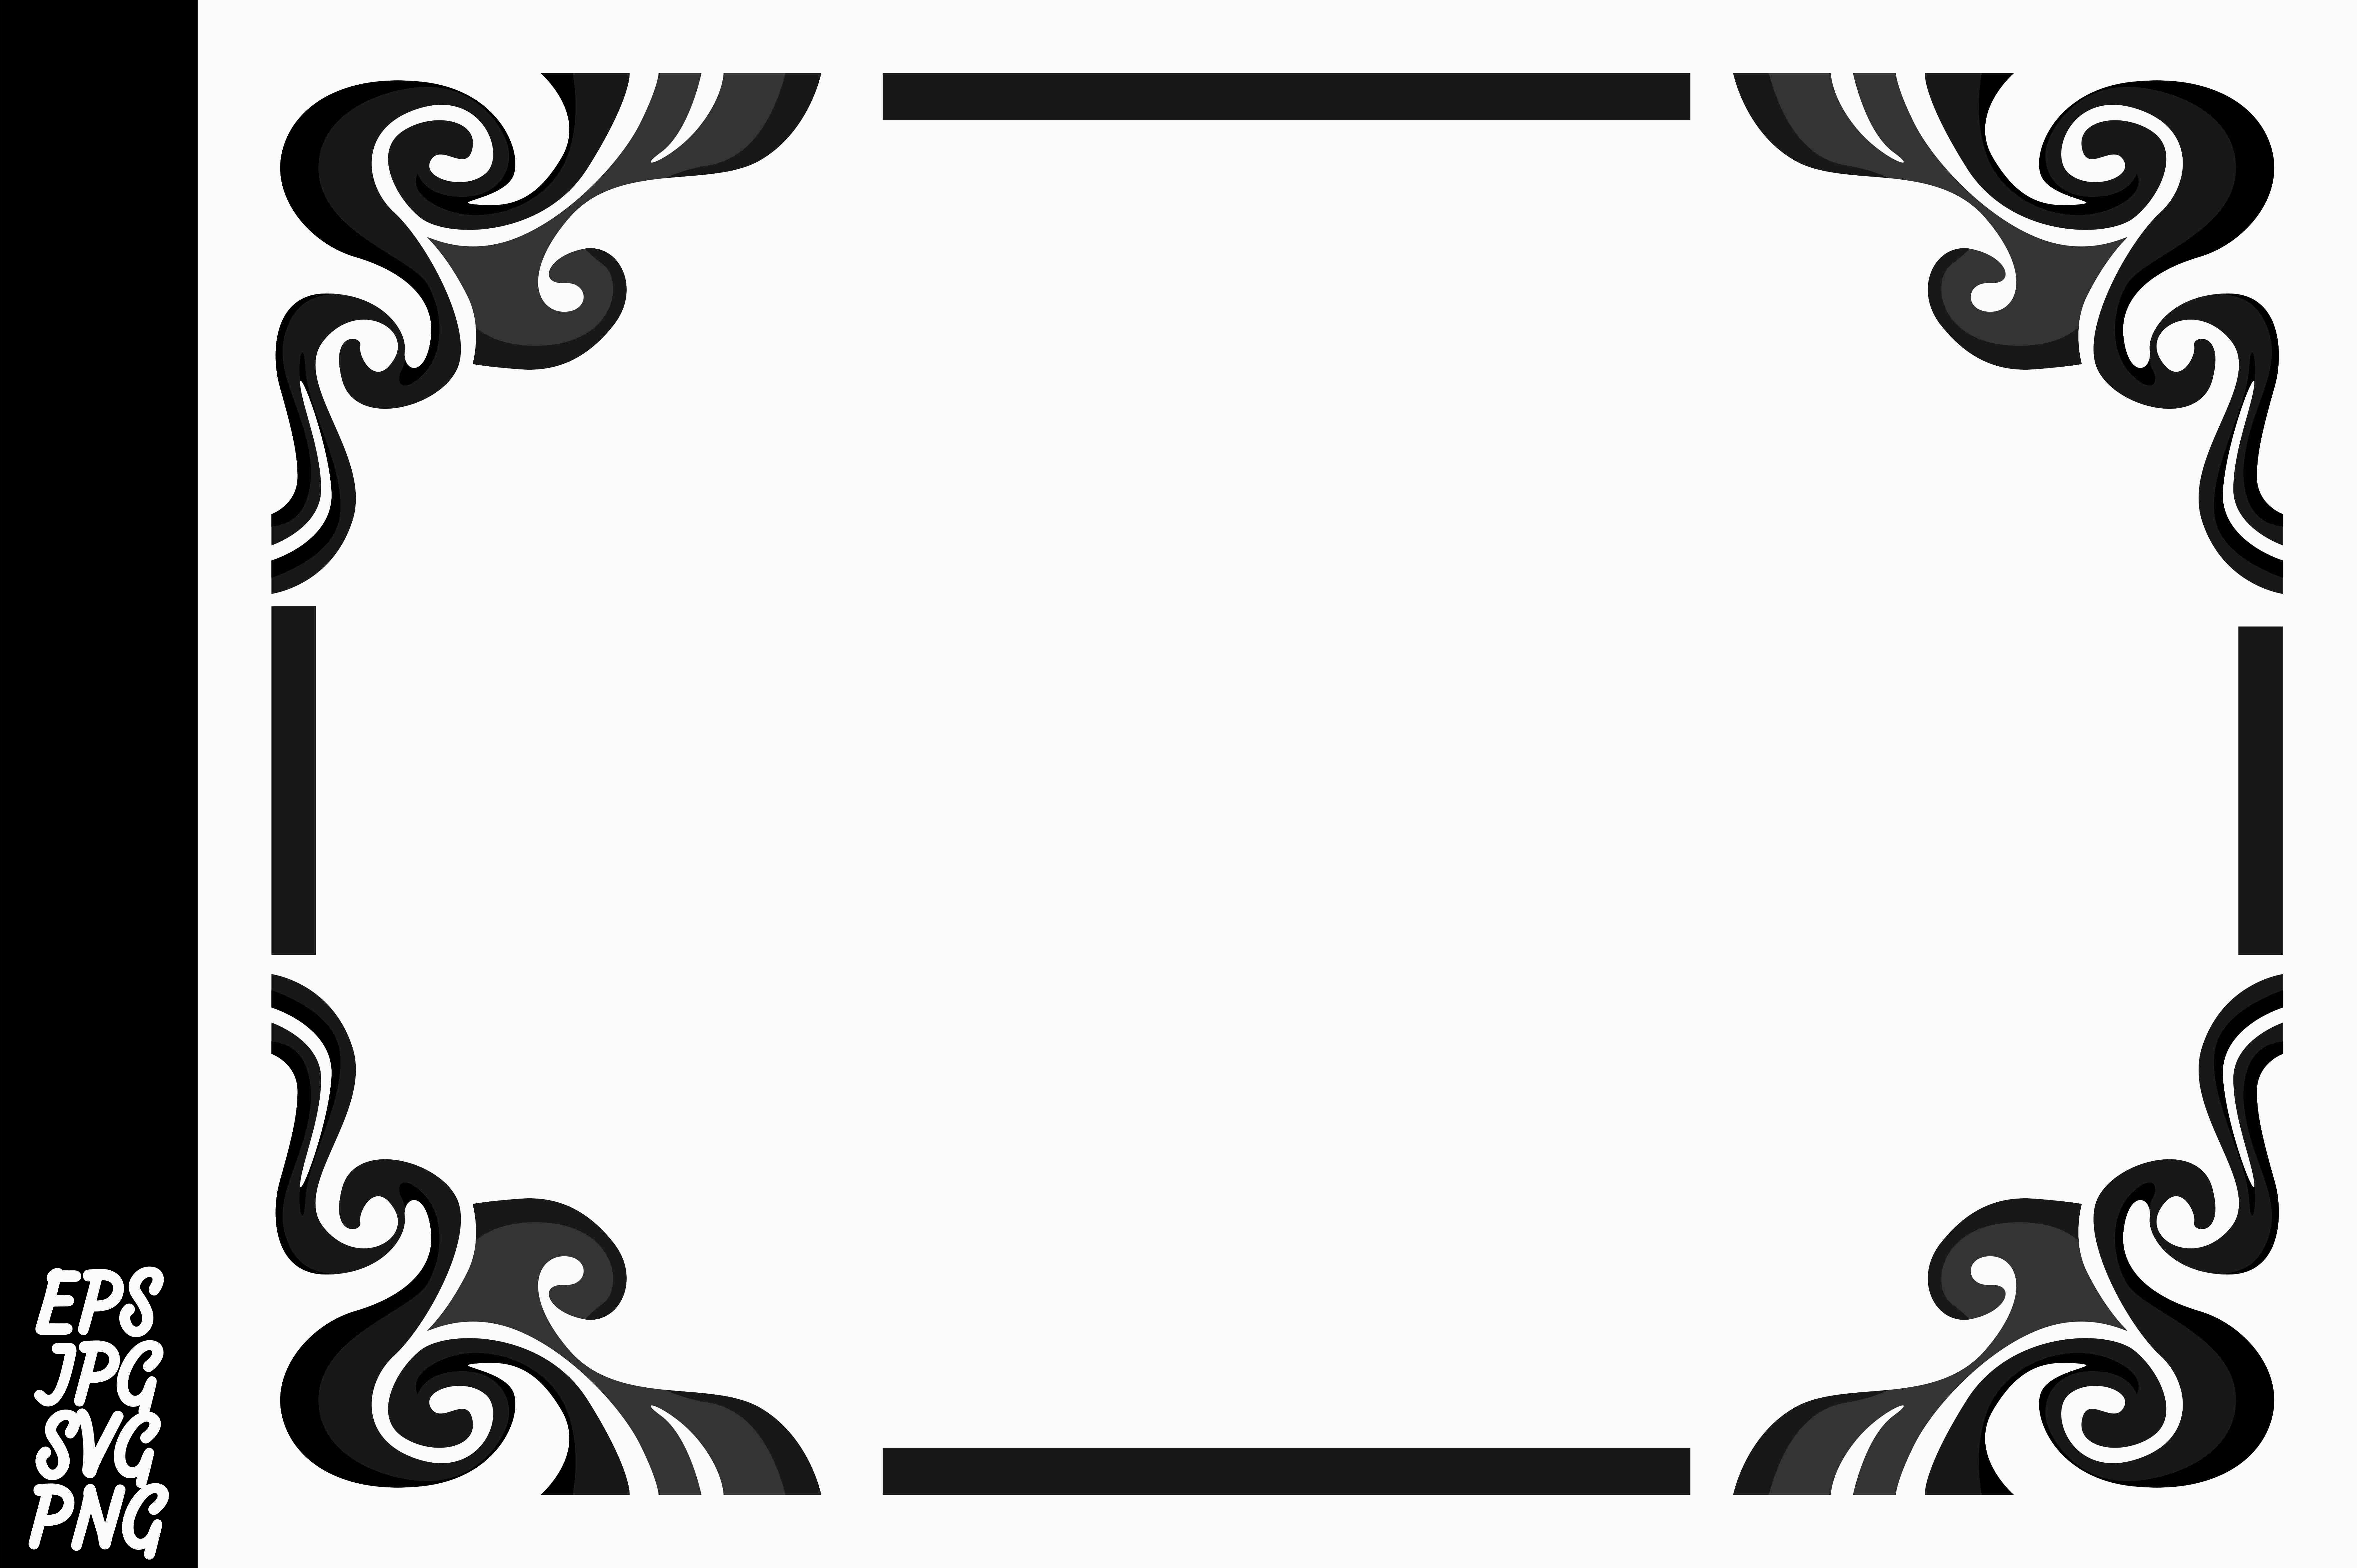 inkscape drawing border